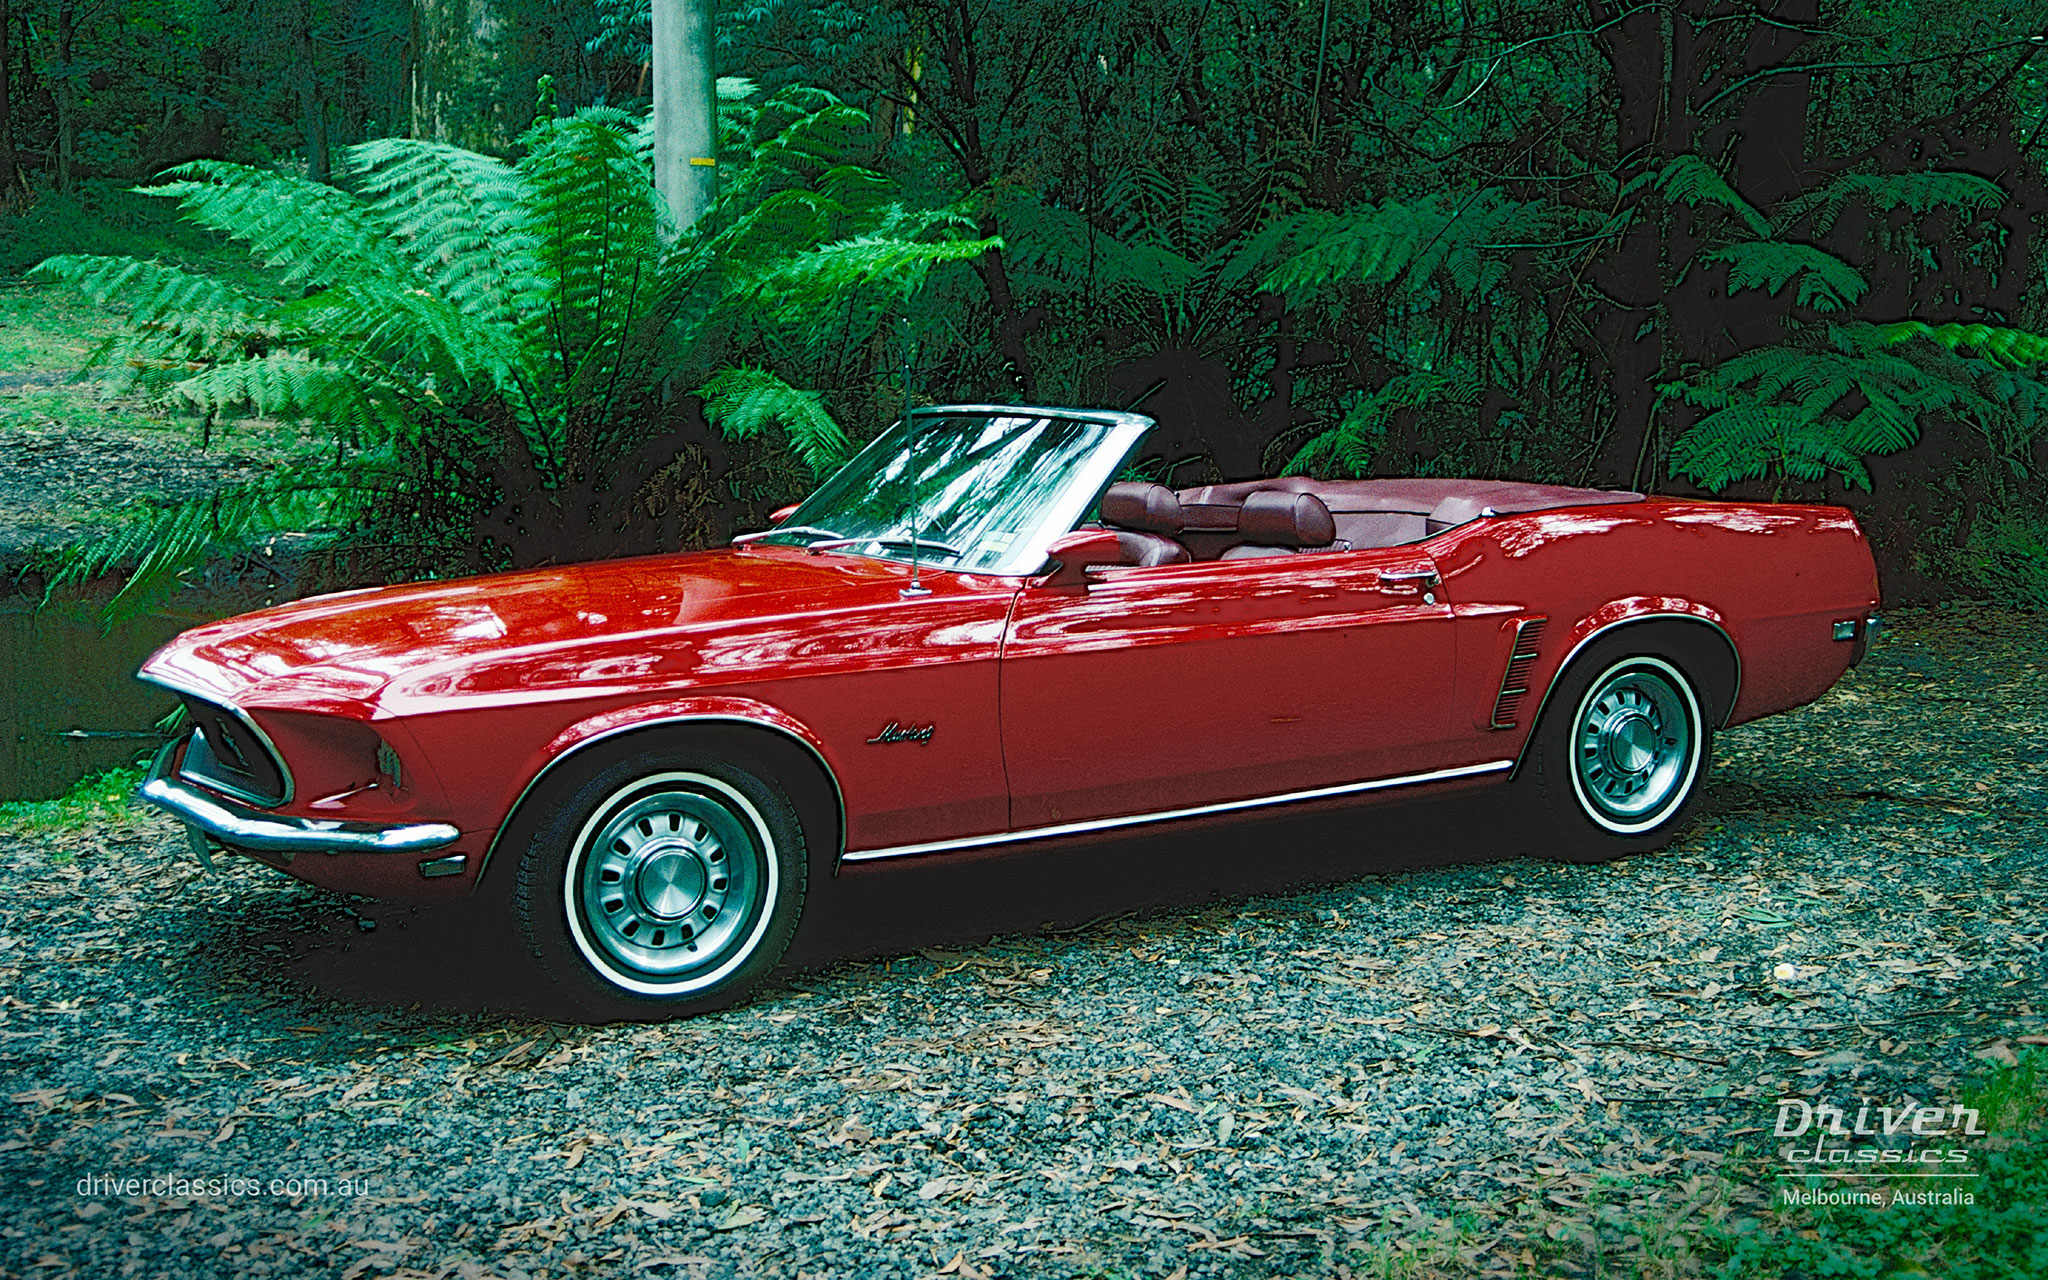 Ford Mustang (1969 model) Convertible, Left side profile and Front, Photo taken in the Dandenong Ranges VIC in 1998.